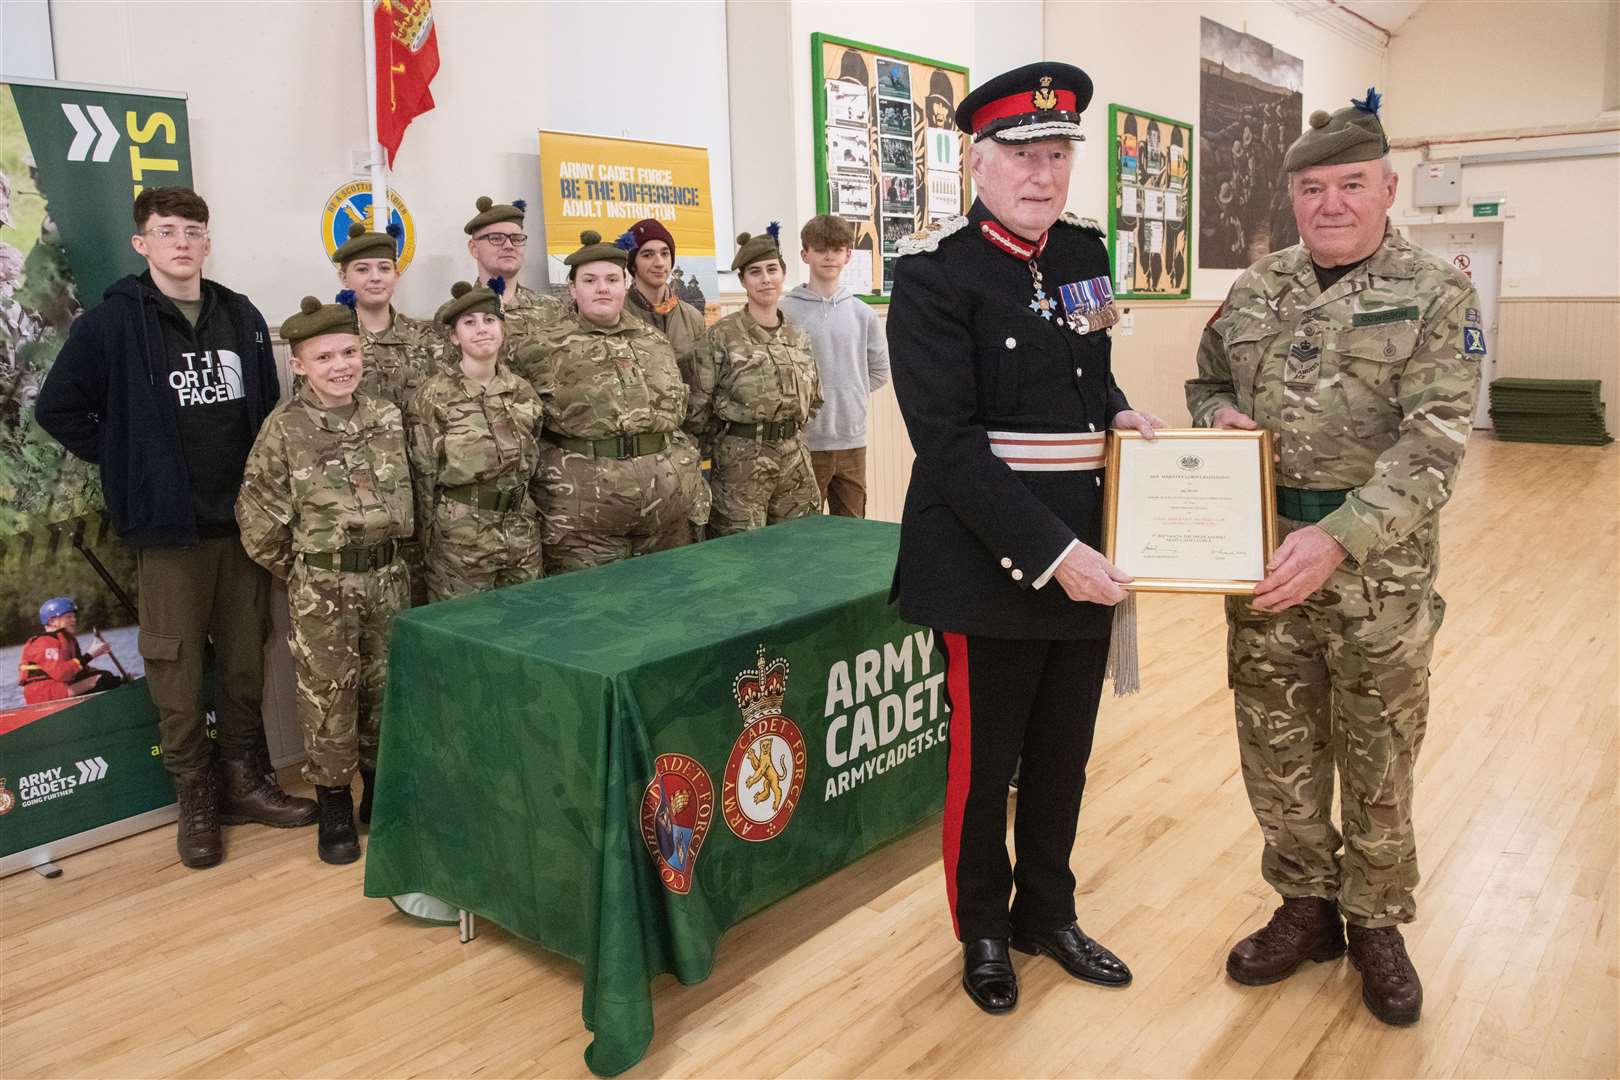 SSI Cowieson (right) is presented with a certificate of high appreciation for his meritorious service to the Army Cadet Force by Major General Monro. Picture: Daniel Forsyth..